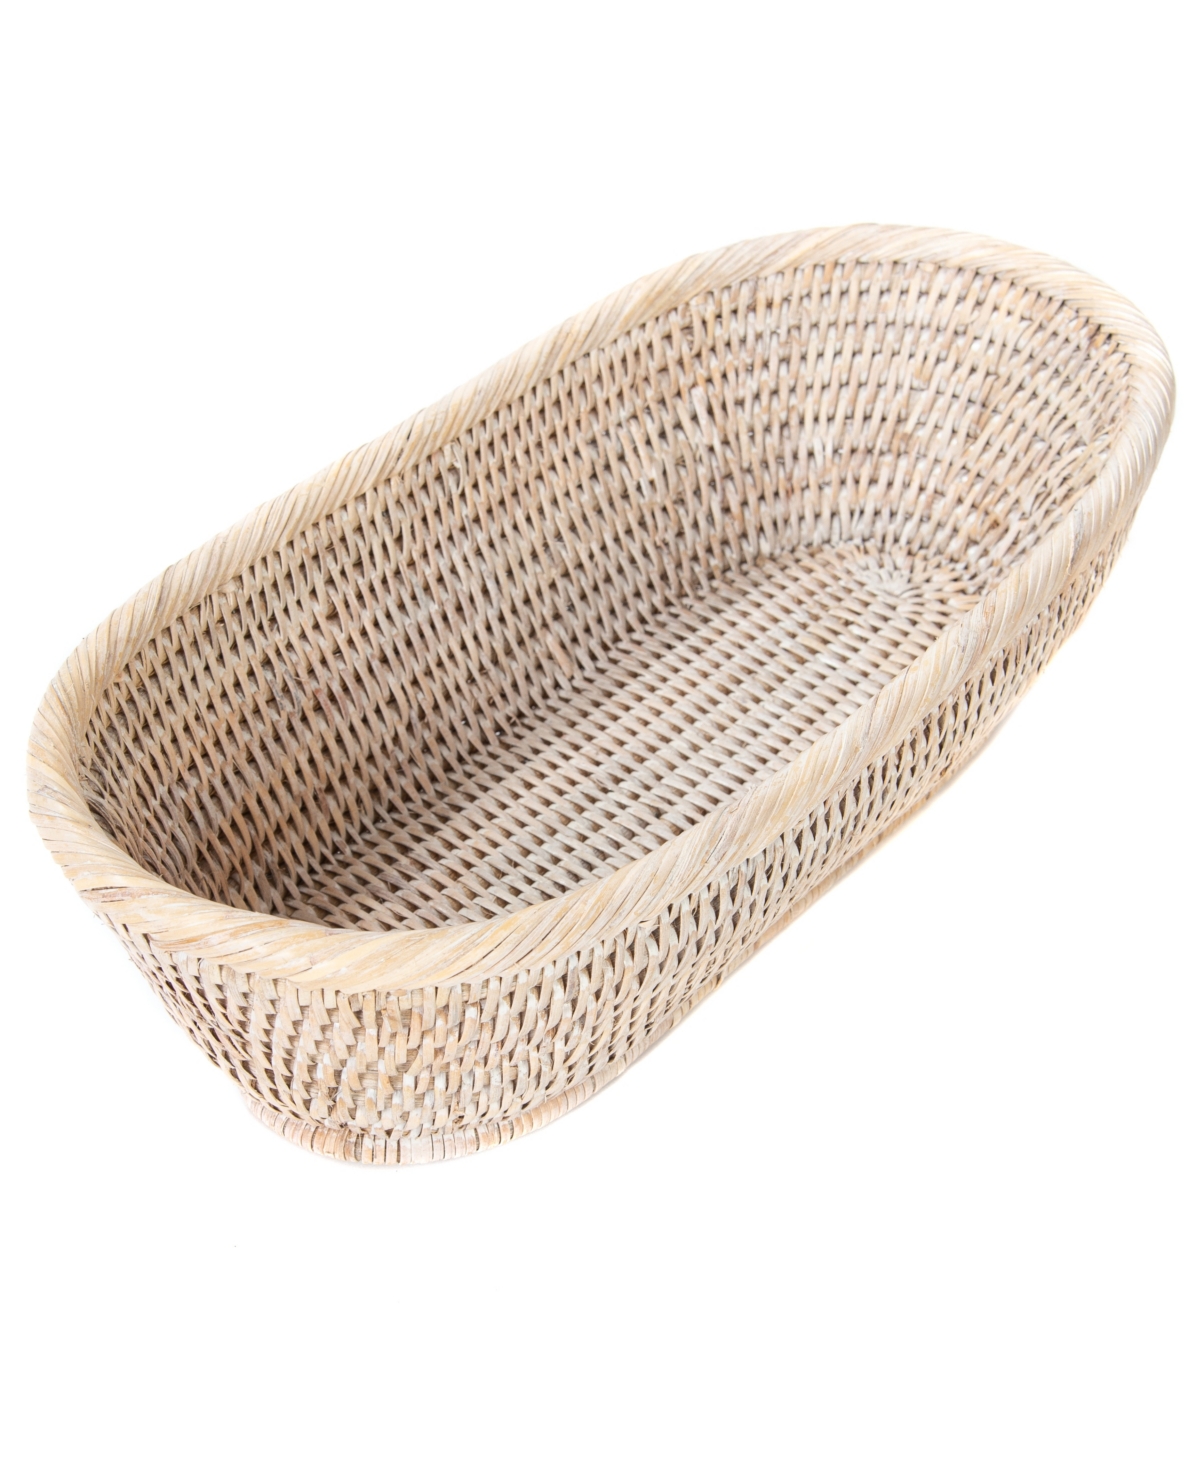 Artifacts Trading Company Artifacts Rattan Oval Bread Basket In Off-white